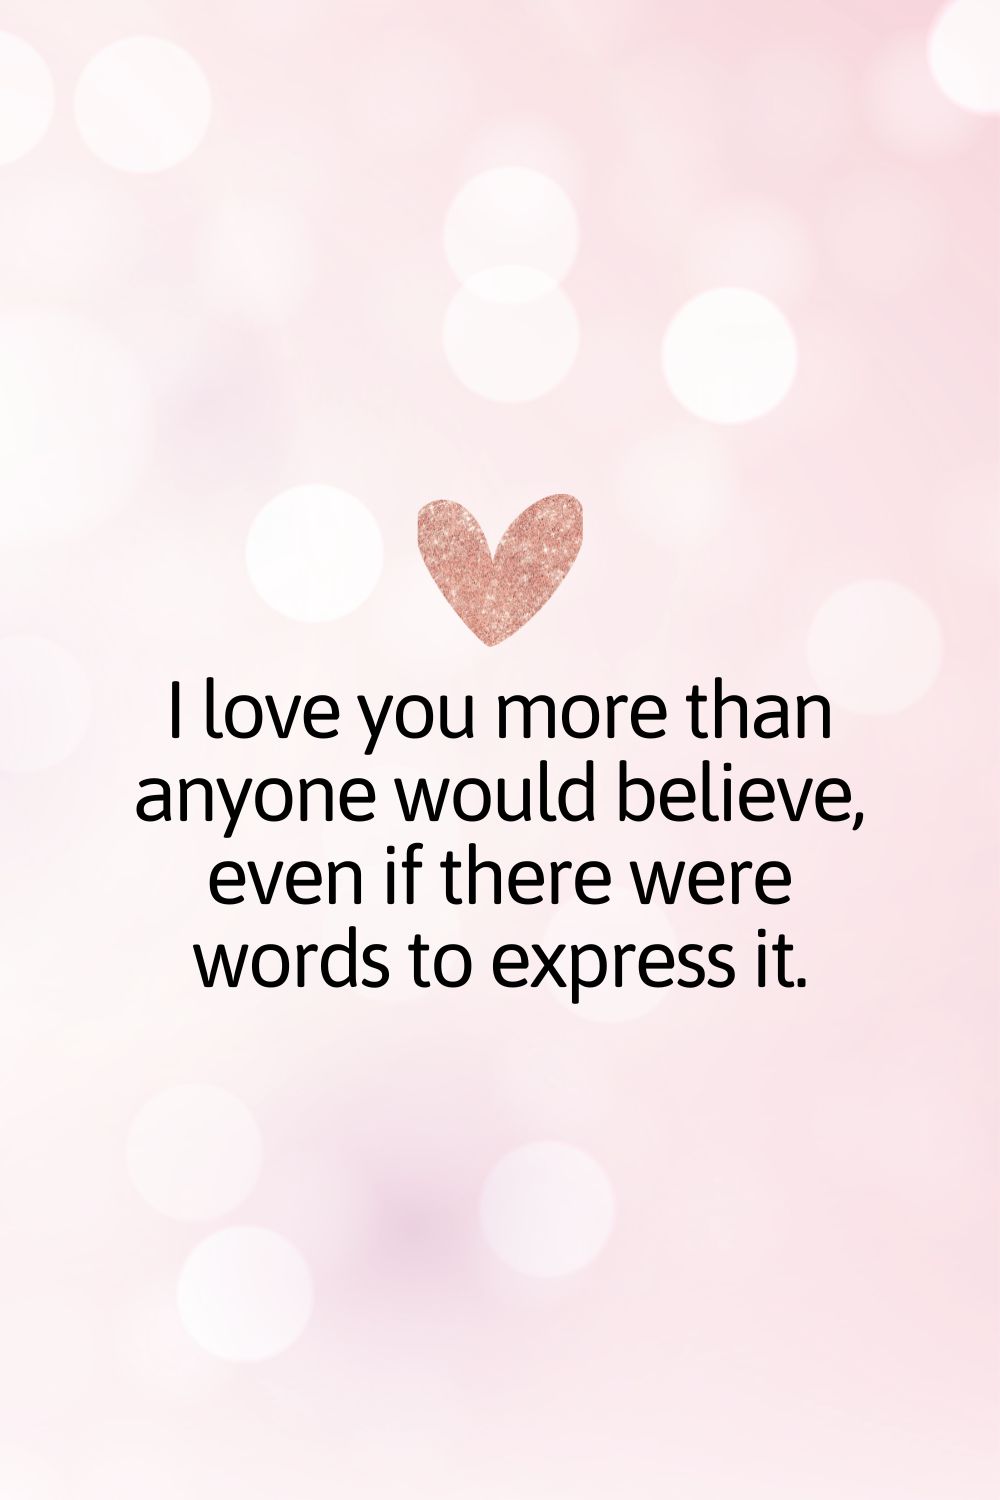 I love you more than anyone would believe, even if there were words to express it.